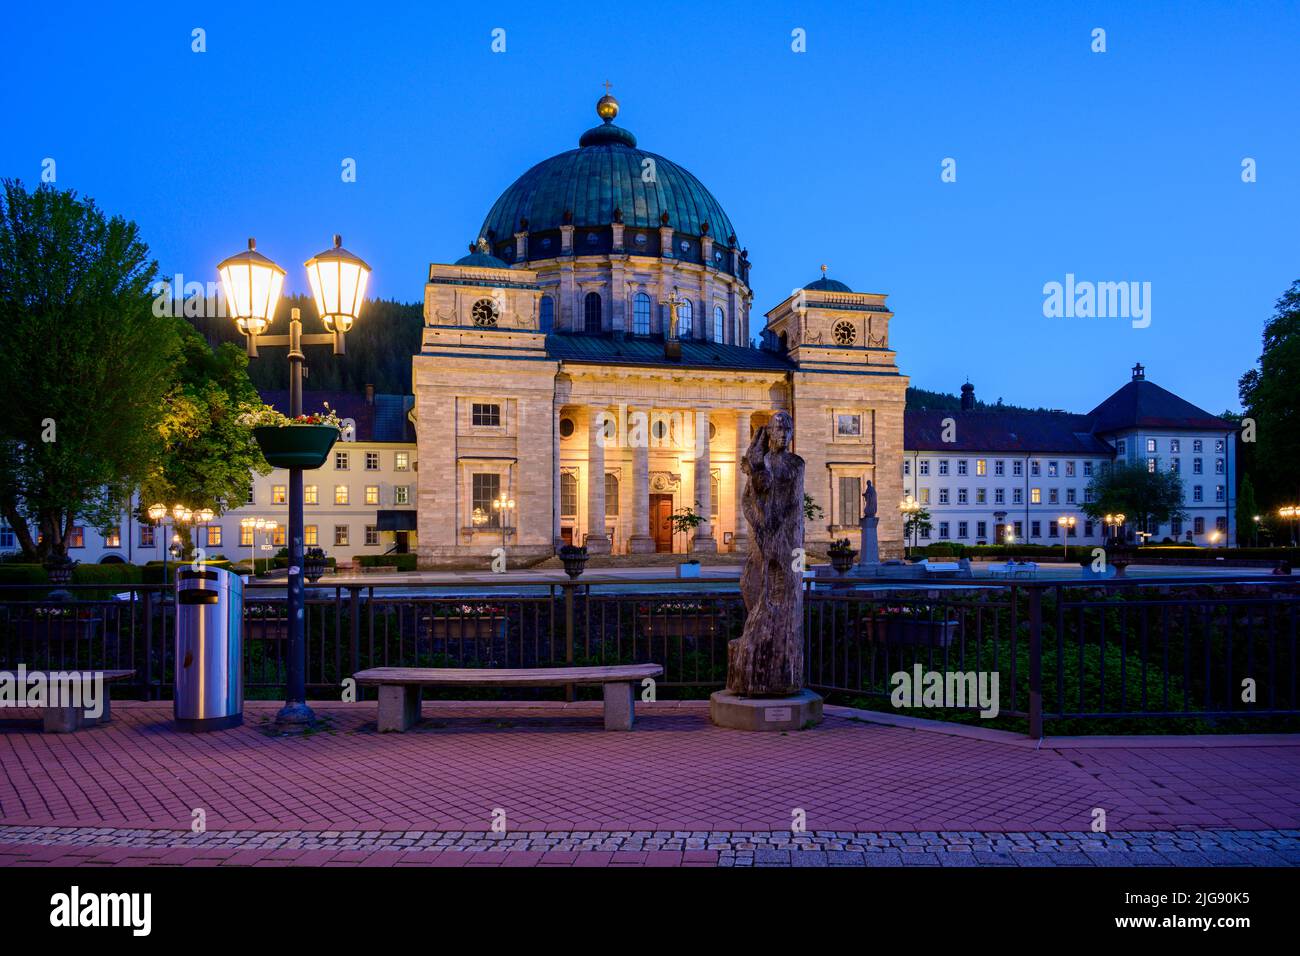 Germany, Baden-Wuerttemberg, Black Forest, St. Blasien, the cathedral in the evening light. Stock Photo